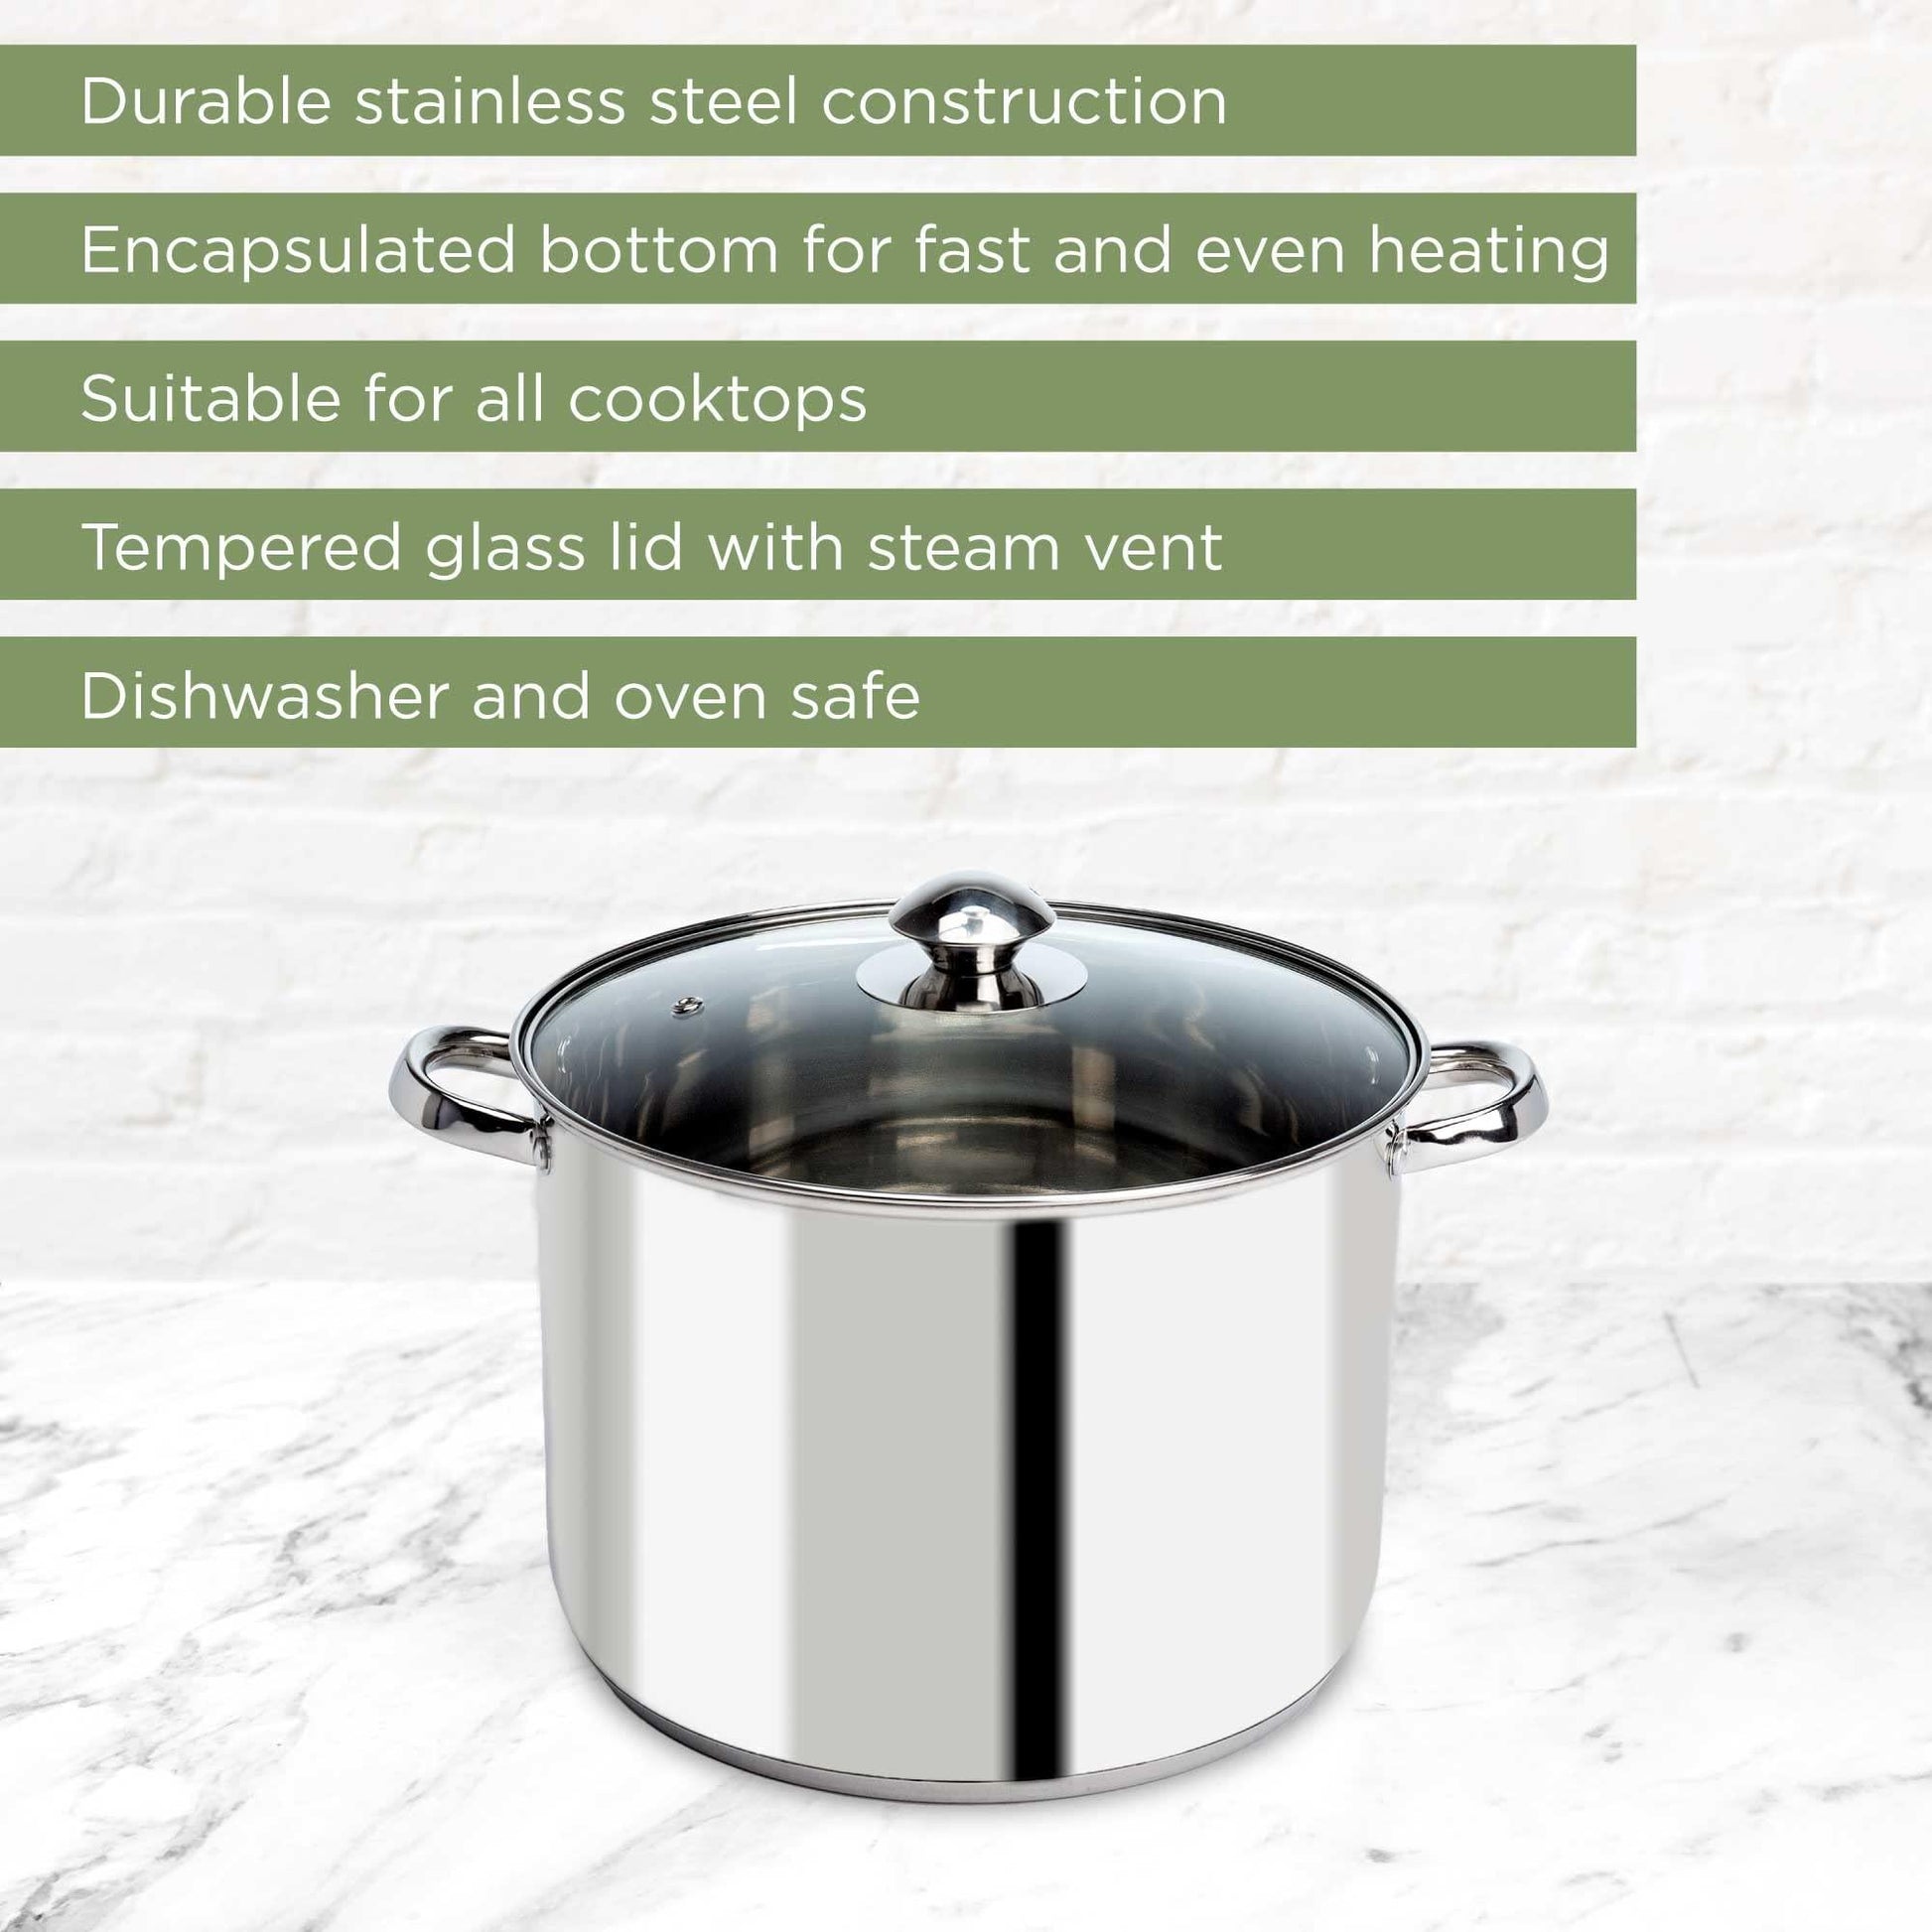 Ecolution Stainless Steel Stock Pot with Encapsulated Bottom Matching Tempered Glass Steam Vented Lids, Made Without PFOA, Dishwasher Safe, 8-Quart, Silver - CookCave